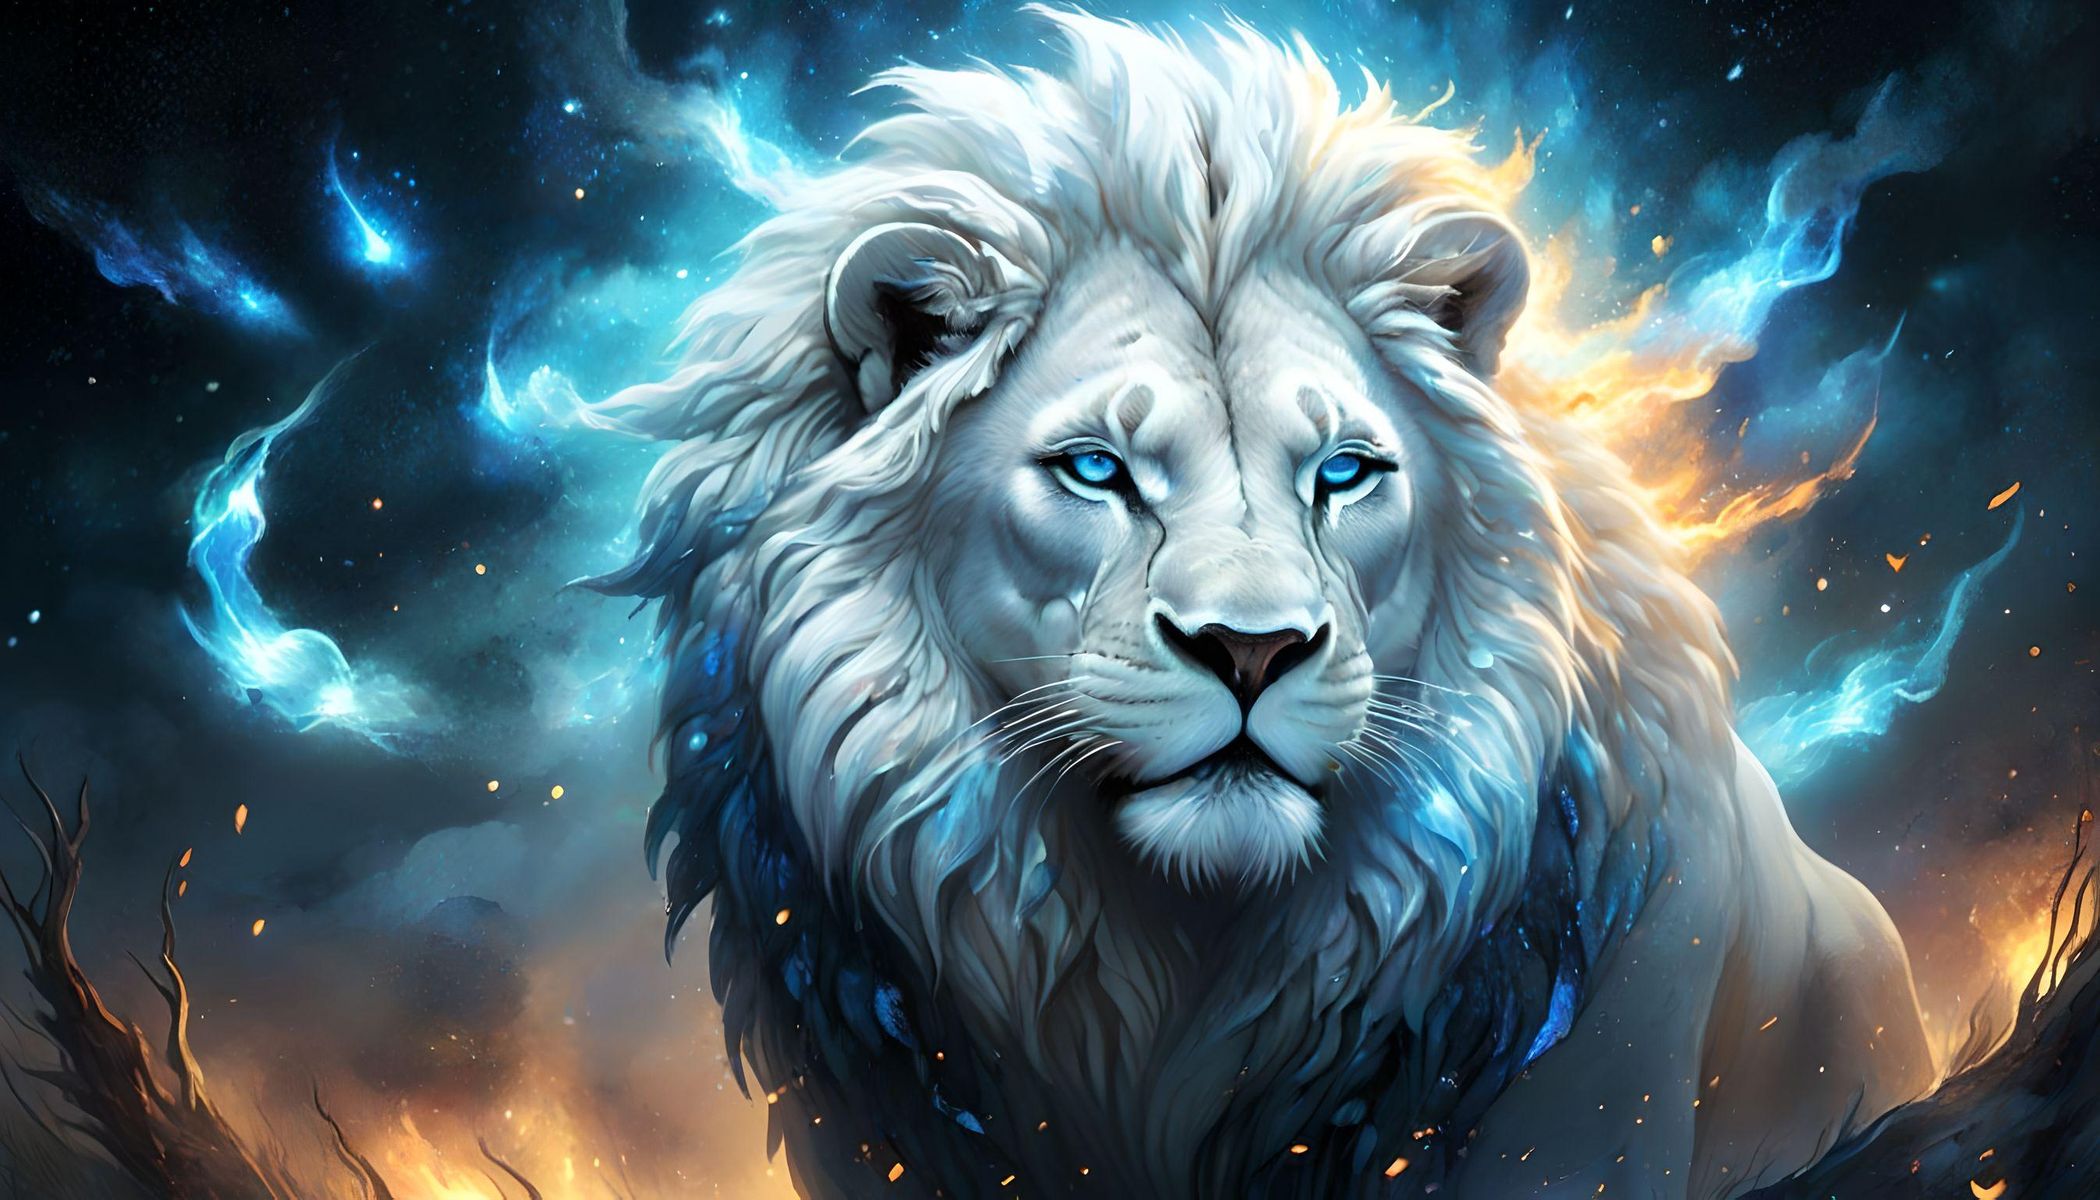 Ultra realistic detail, white male lion, saber tooth lion, mane made of blue flaming fire, glowing blue eyes, grassland, night, stars, galaxies.